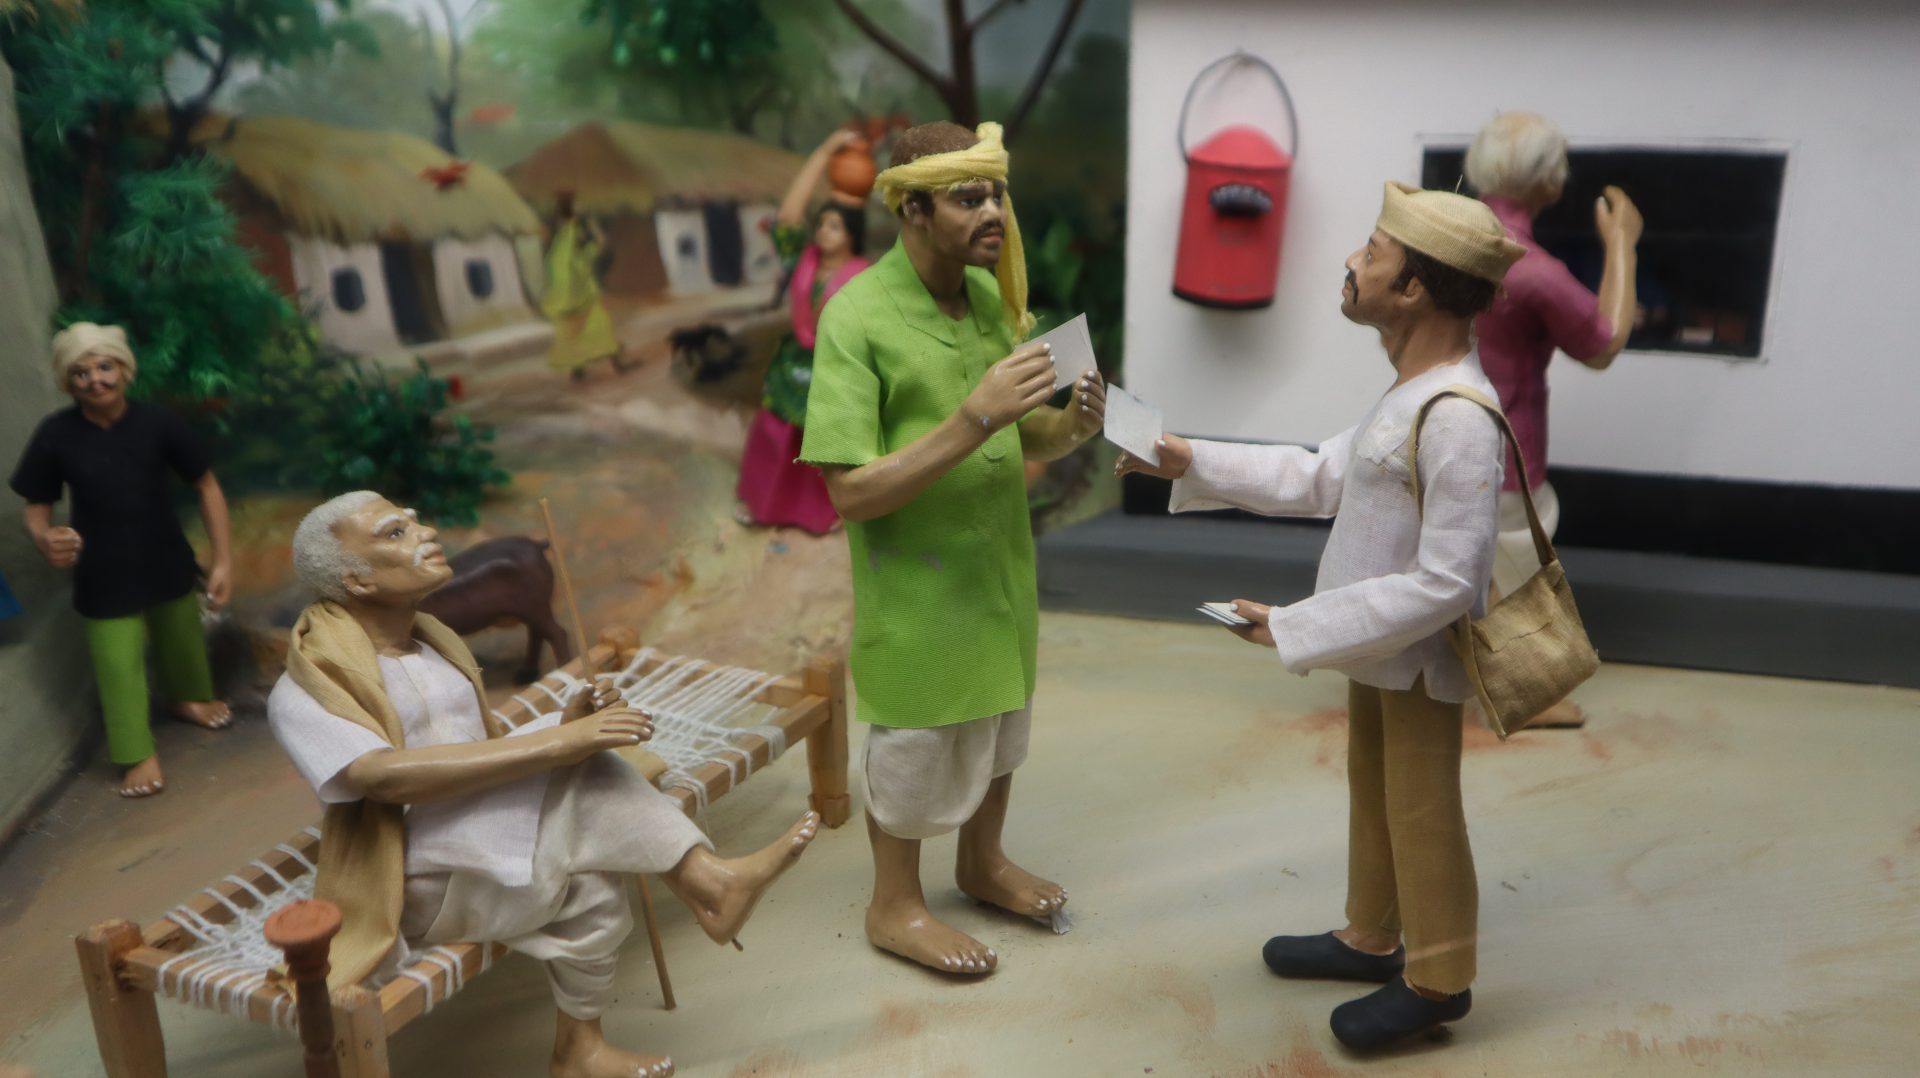 Colour image of a miniature diorama of cartoon figurines in a village scene. Two brown-skinned moustached figures in the foreground exchange letters, and a red postbox appears behind them. An older figure is seated on a bed, while in the background three other figures mill about, including a woman in a pink and green sari carries a jug on her head.